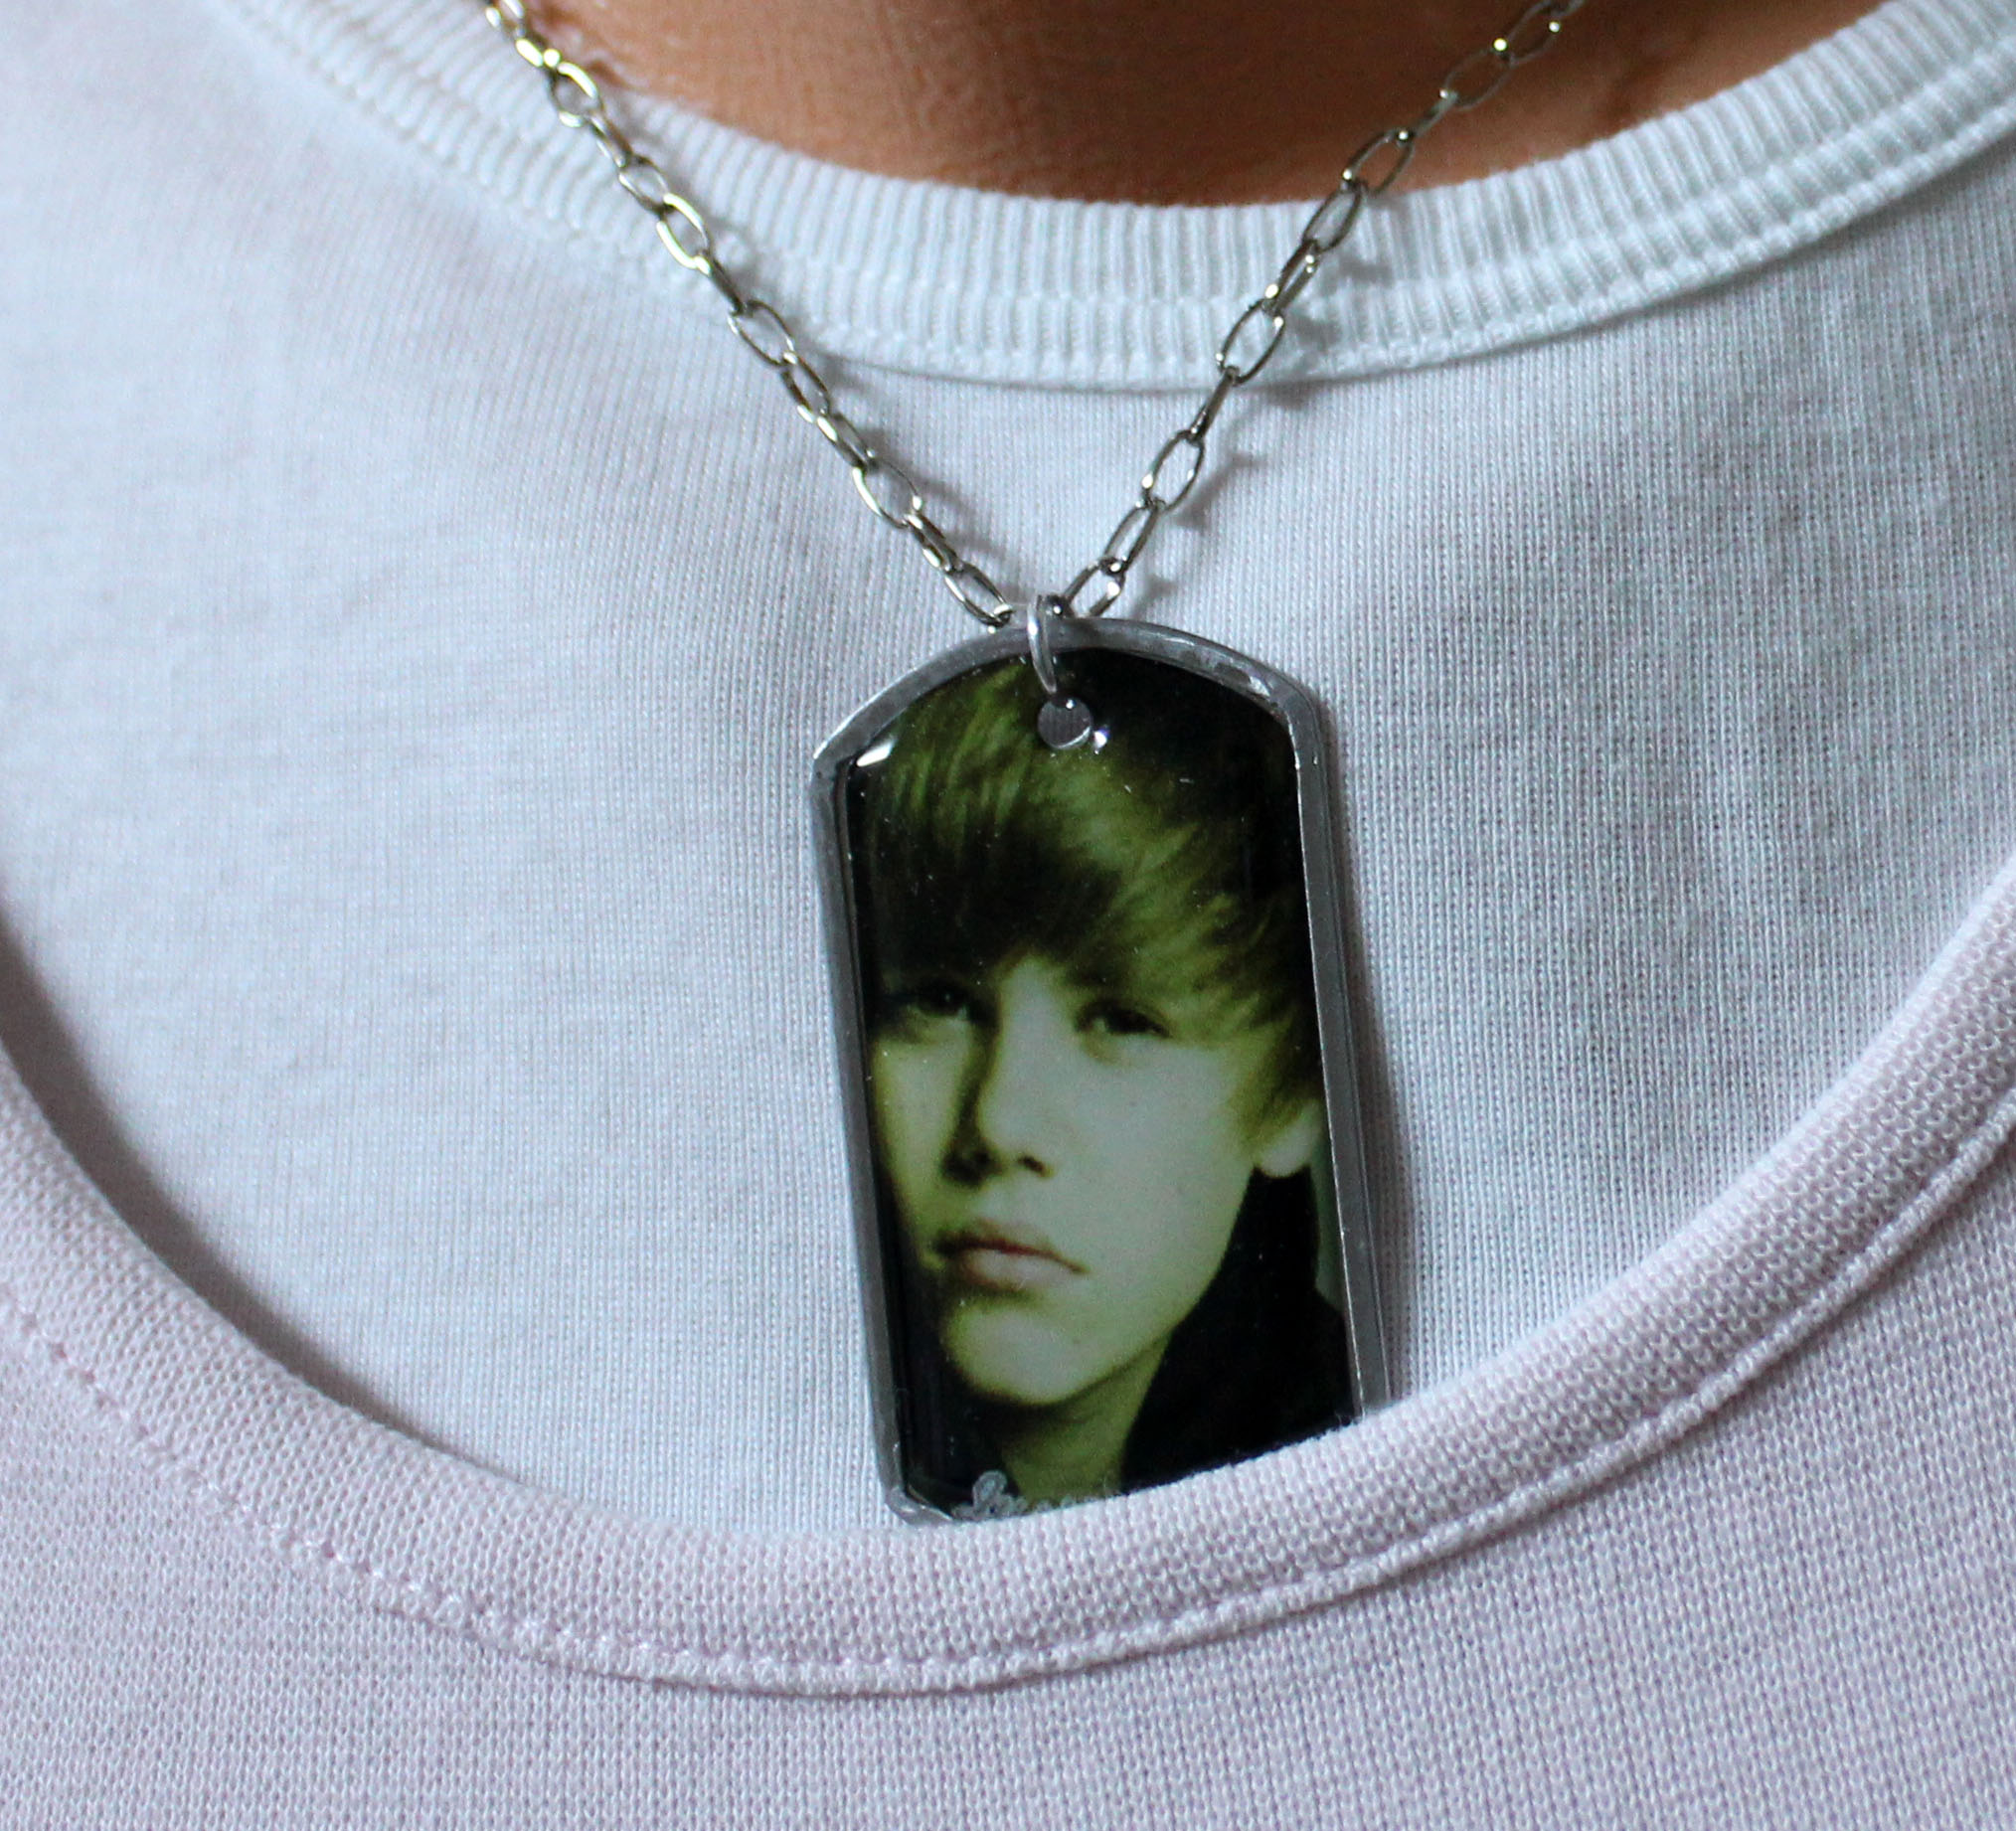 Justin Bieber Necklace With His Picture on Luulla